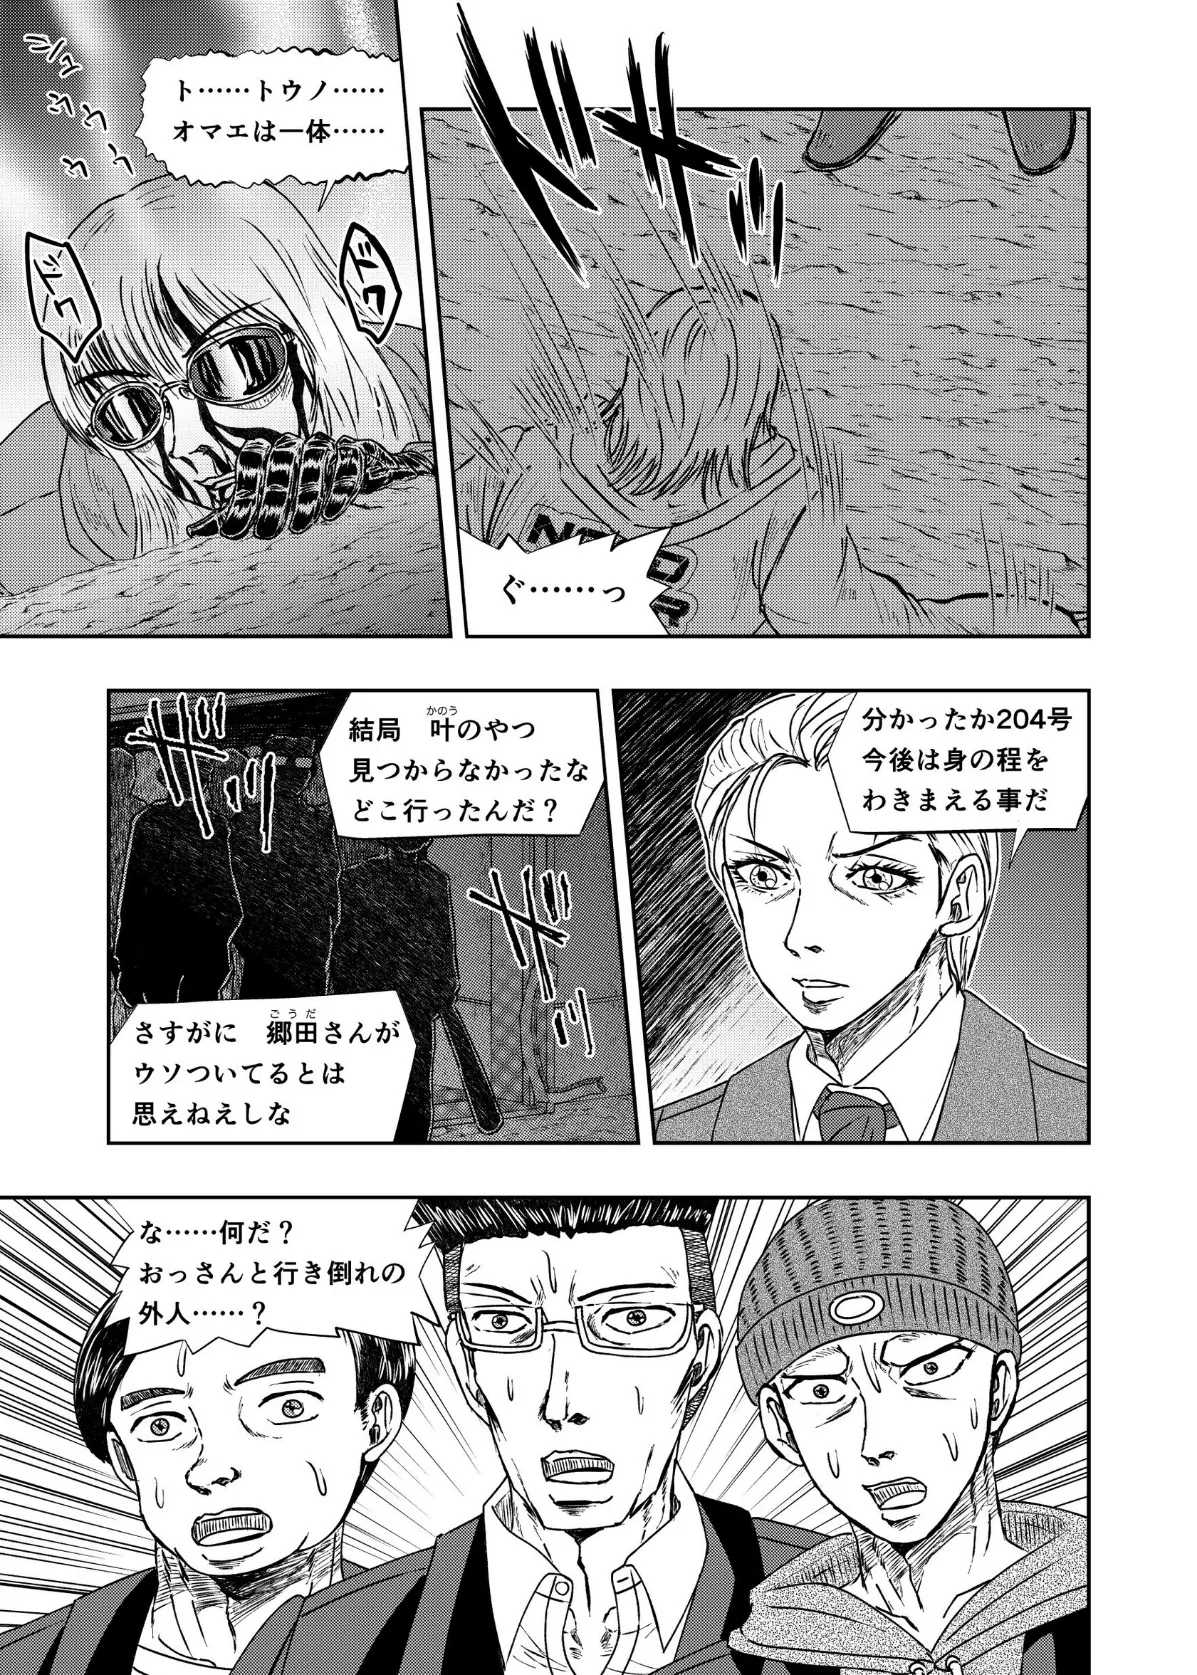 XENON REBOOT＜BASED STORY ON ’BIO DIVER XENON’＞【分冊版】 Chapter1 STRANGERS When We Meet（3） 9ページ